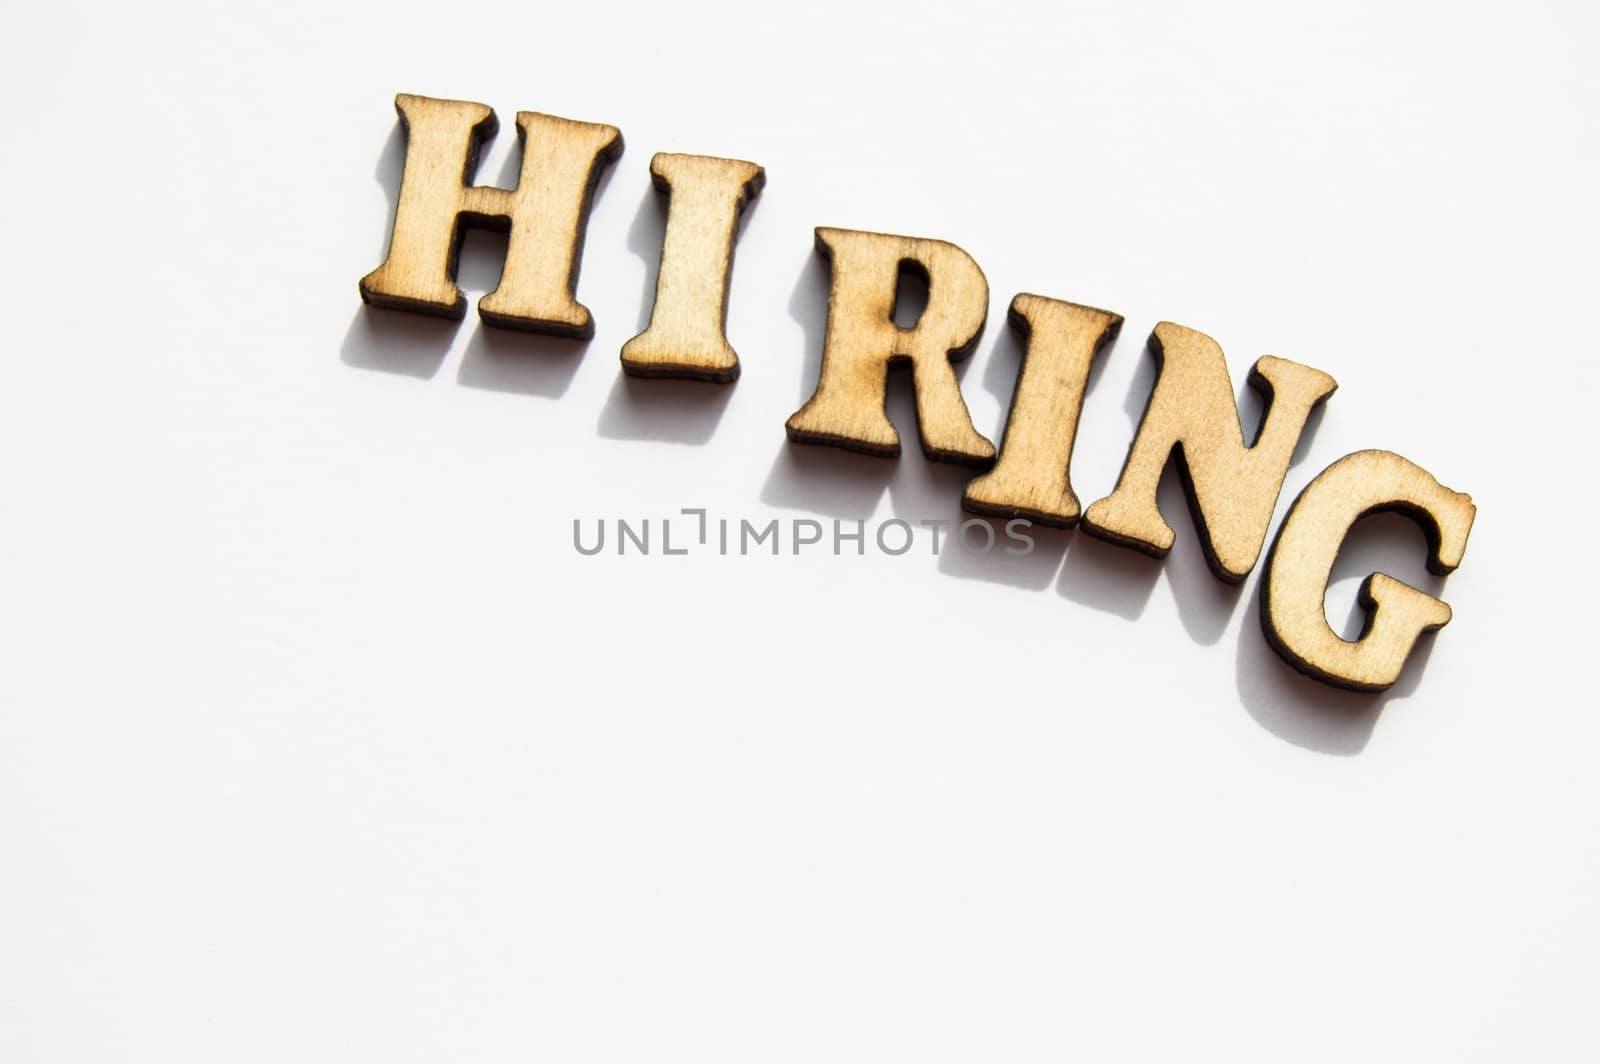 The word hiring is written in gold letters, isolated on white background, copy space, mockup for designer by claire_lucia